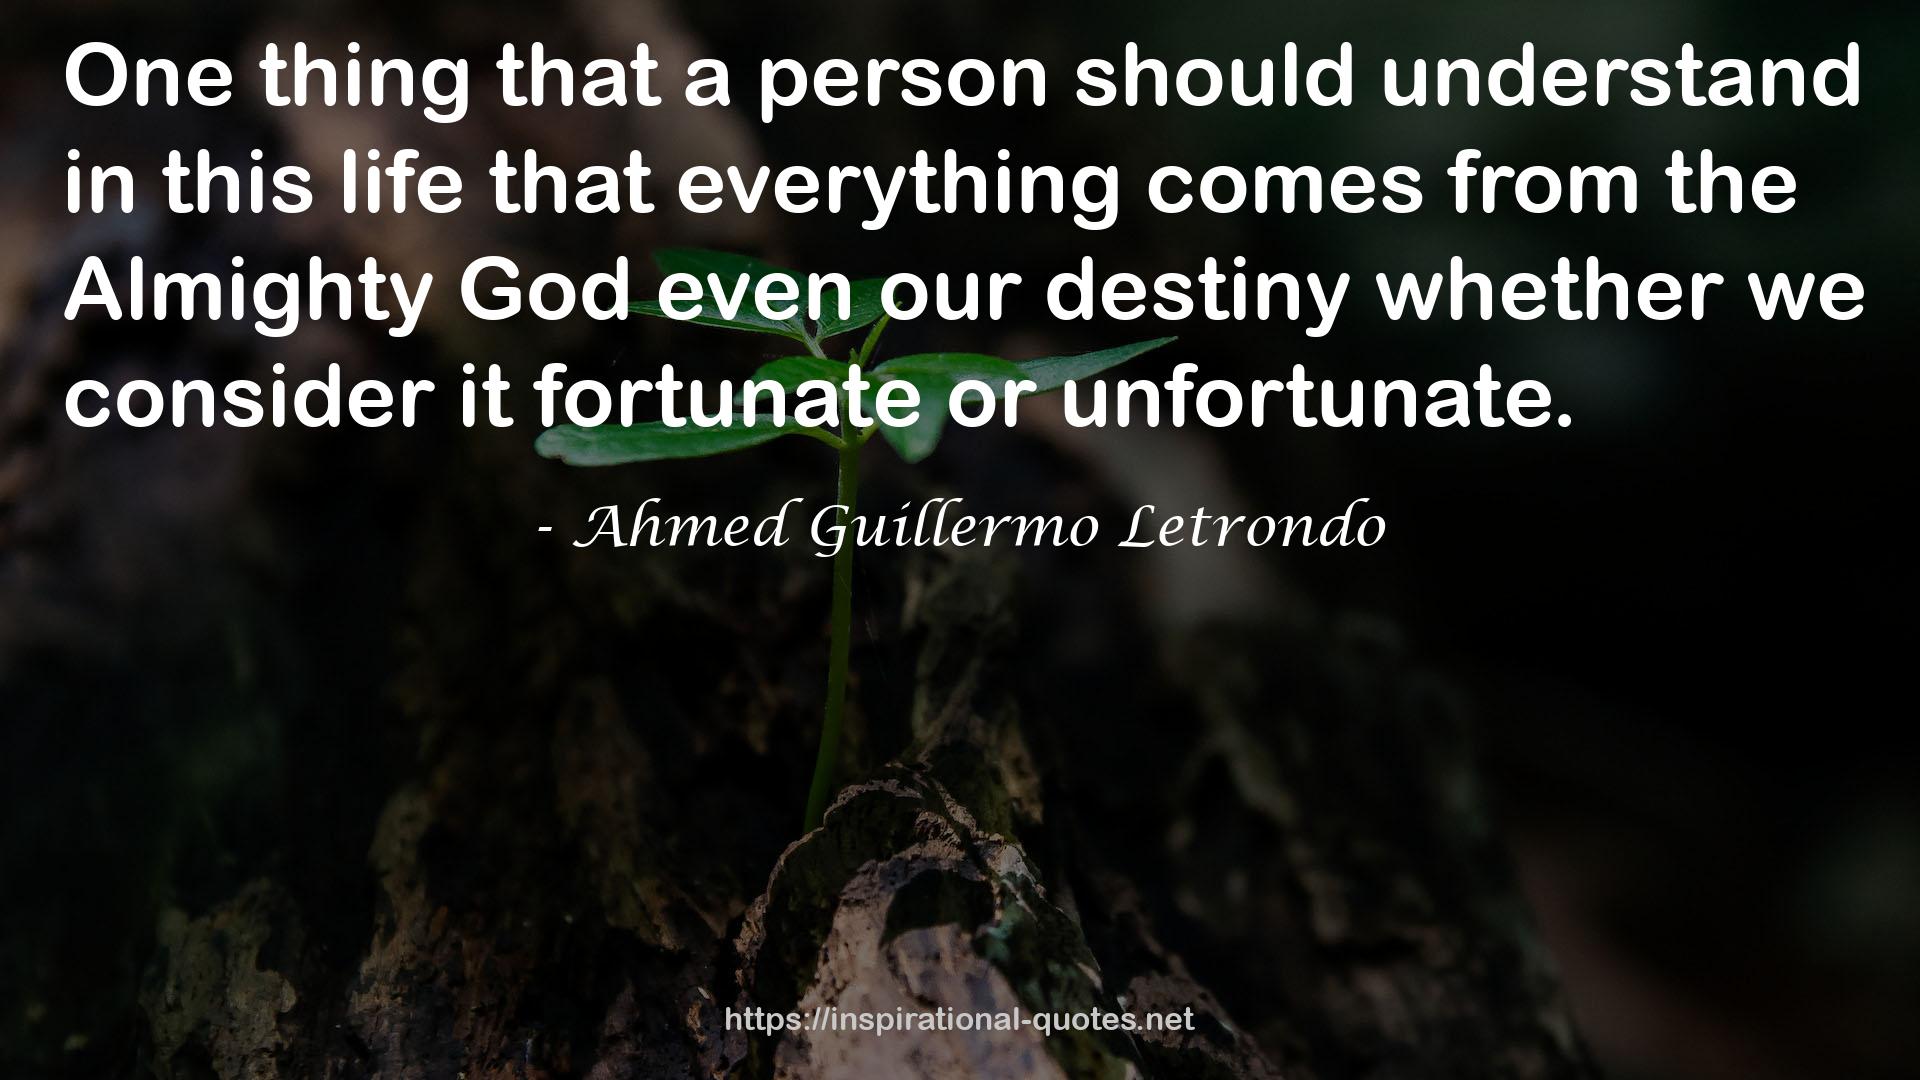 Ahmed Guillermo Letrondo QUOTES